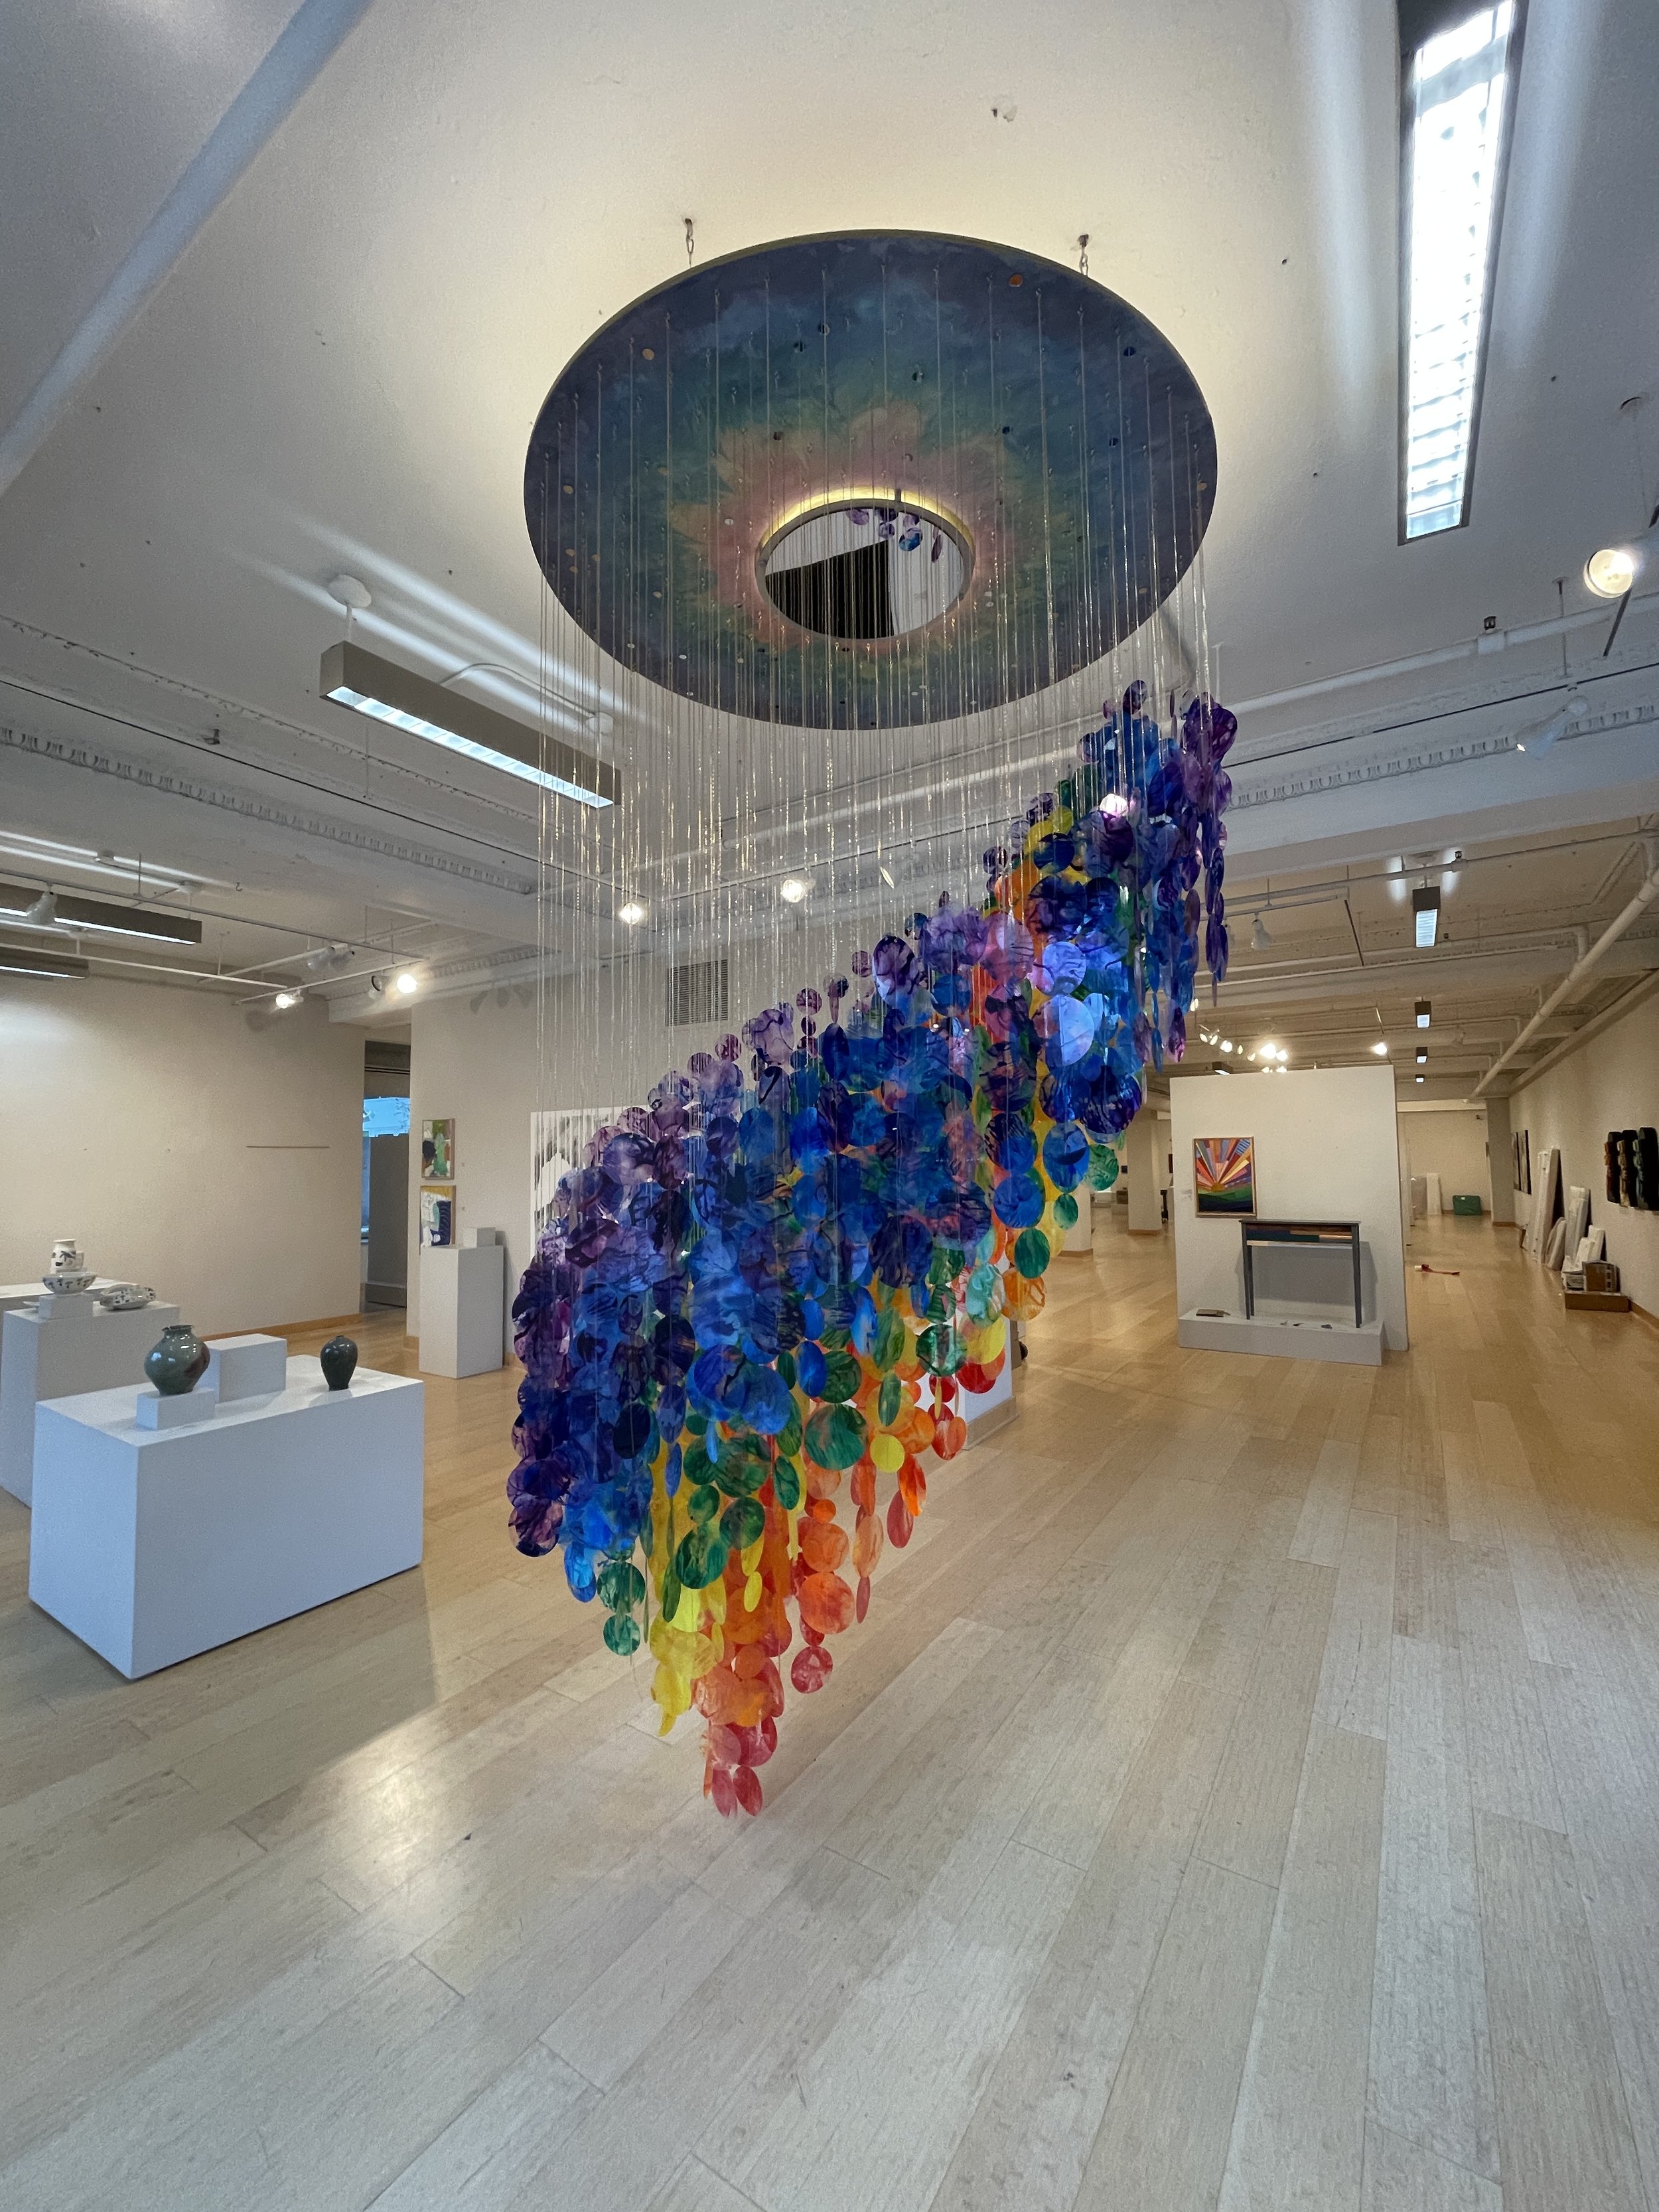   Suspended rainbow installation, giant immersive mobile art, Raleigh North Carolina installation artist, colorful kinetic rainbow sculpture, immersive installation, suspended sculpture, Raleigh North Carolina sculptor She Found Her Path By Looking W